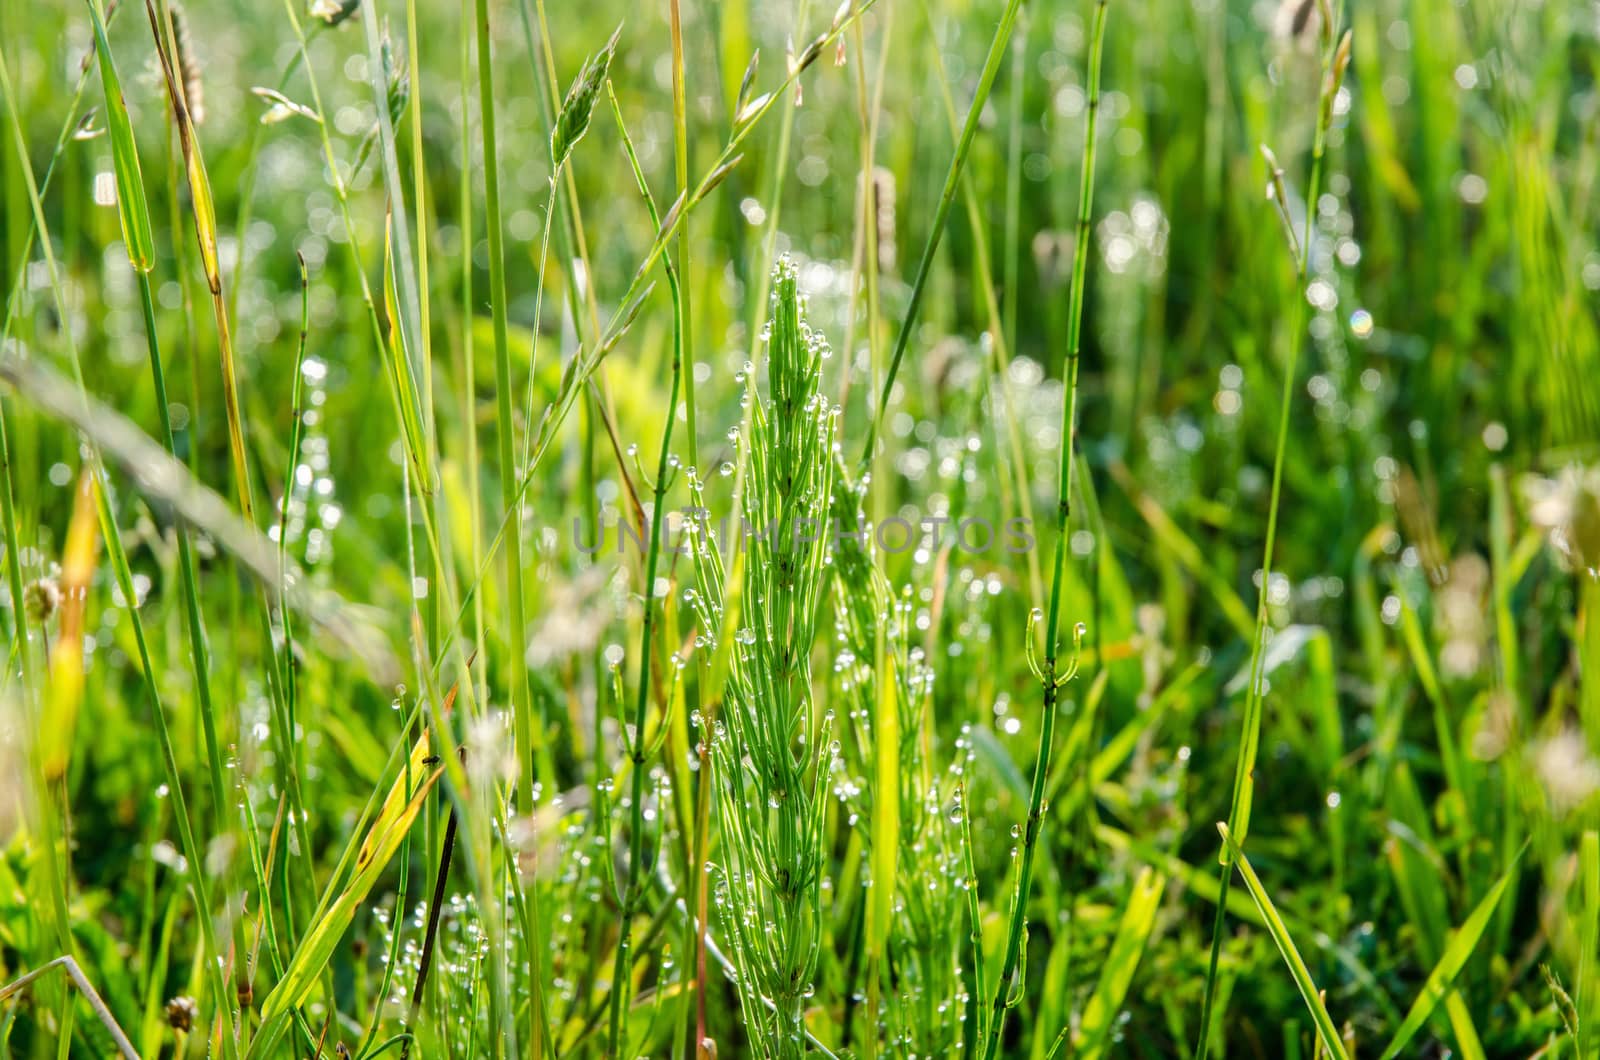 Meadow grass with dew droplets by Morfey713